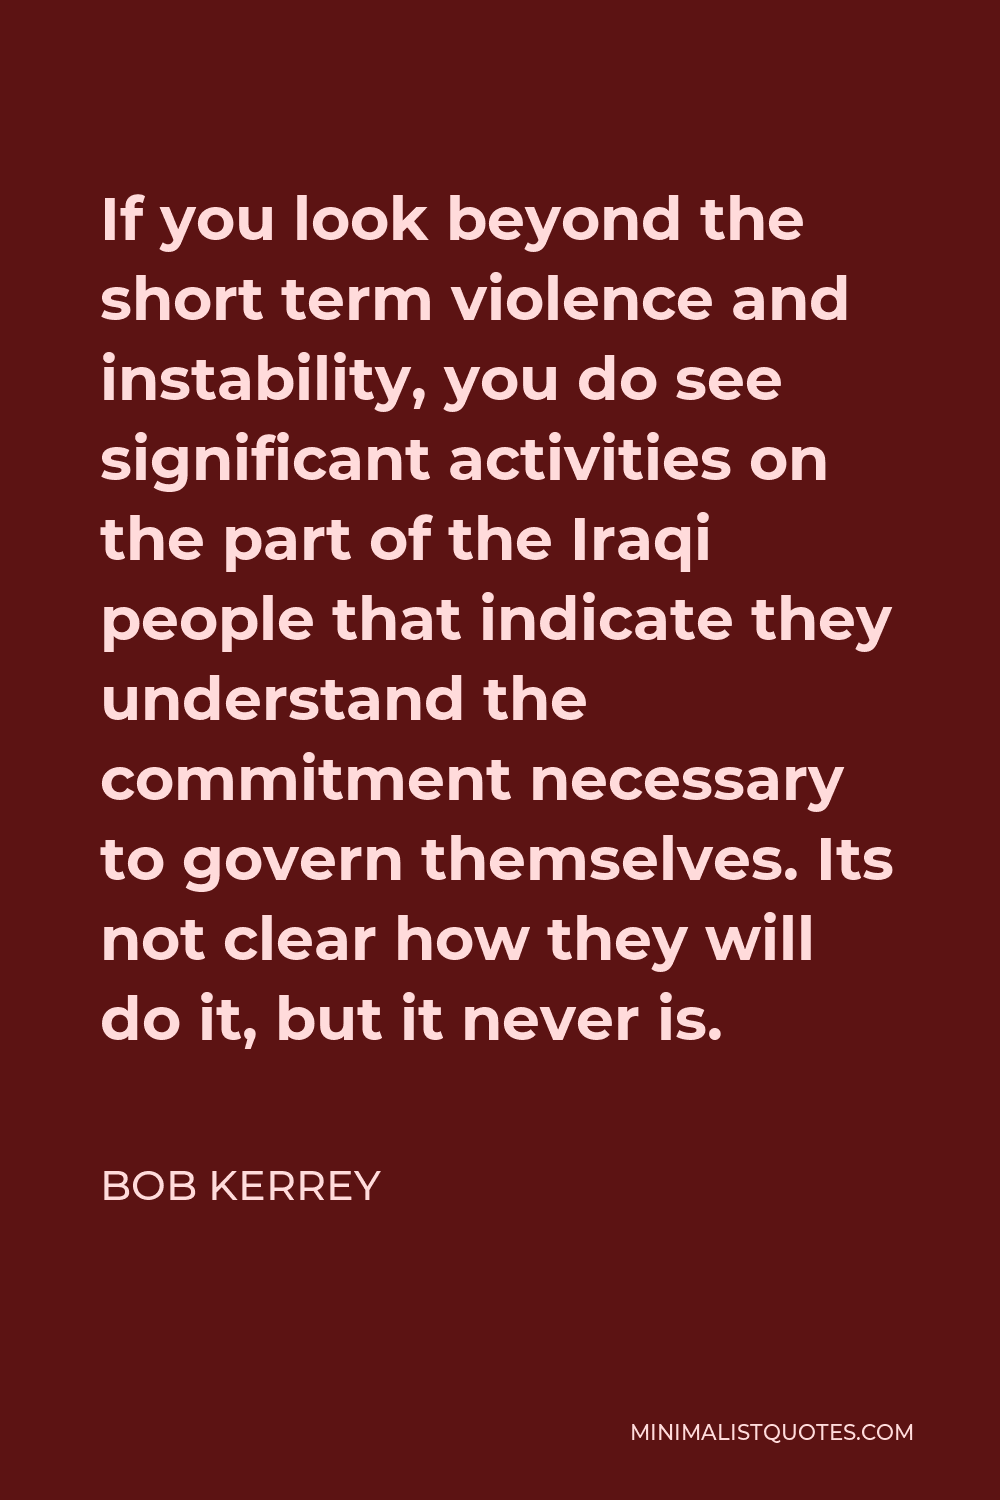 Bob Kerrey Quote - If you look beyond the short term violence and instability, you do see significant activities on the part of the Iraqi people that indicate they understand the commitment necessary to govern themselves. Its not clear how they will do it, but it never is.